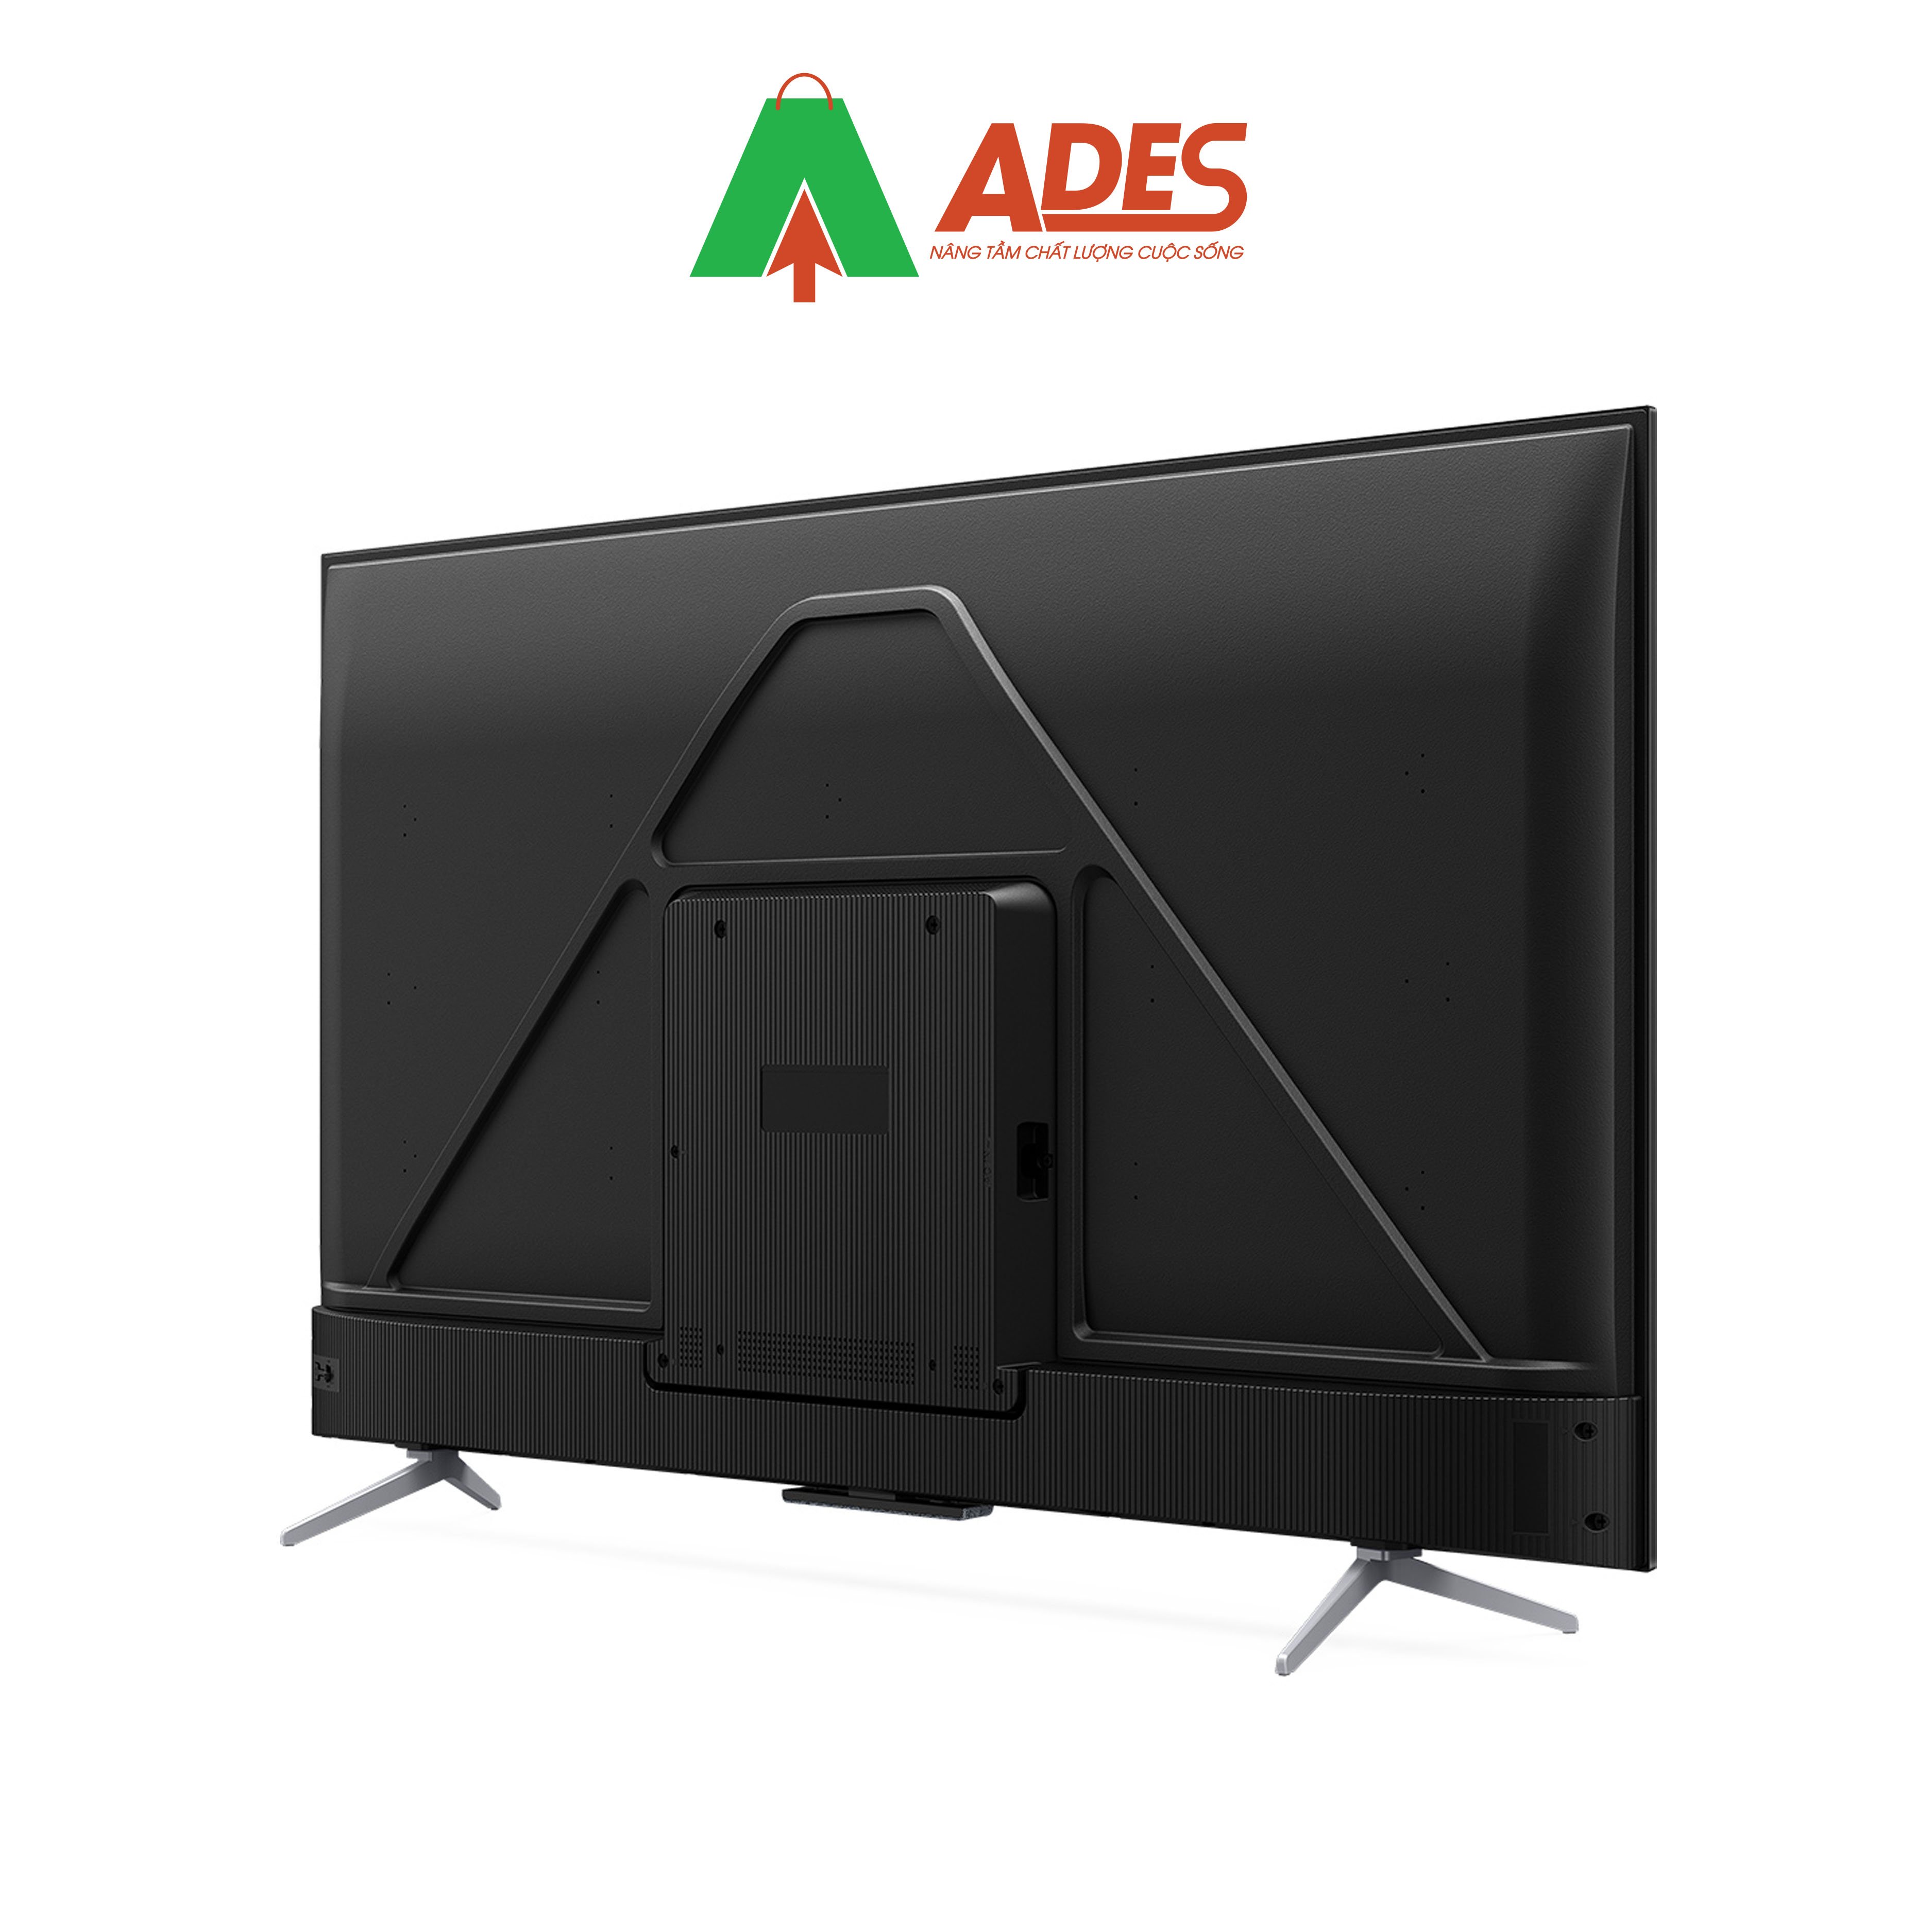 Hinh anh thuc te Android Tivi TCL 75 Inch 75P725